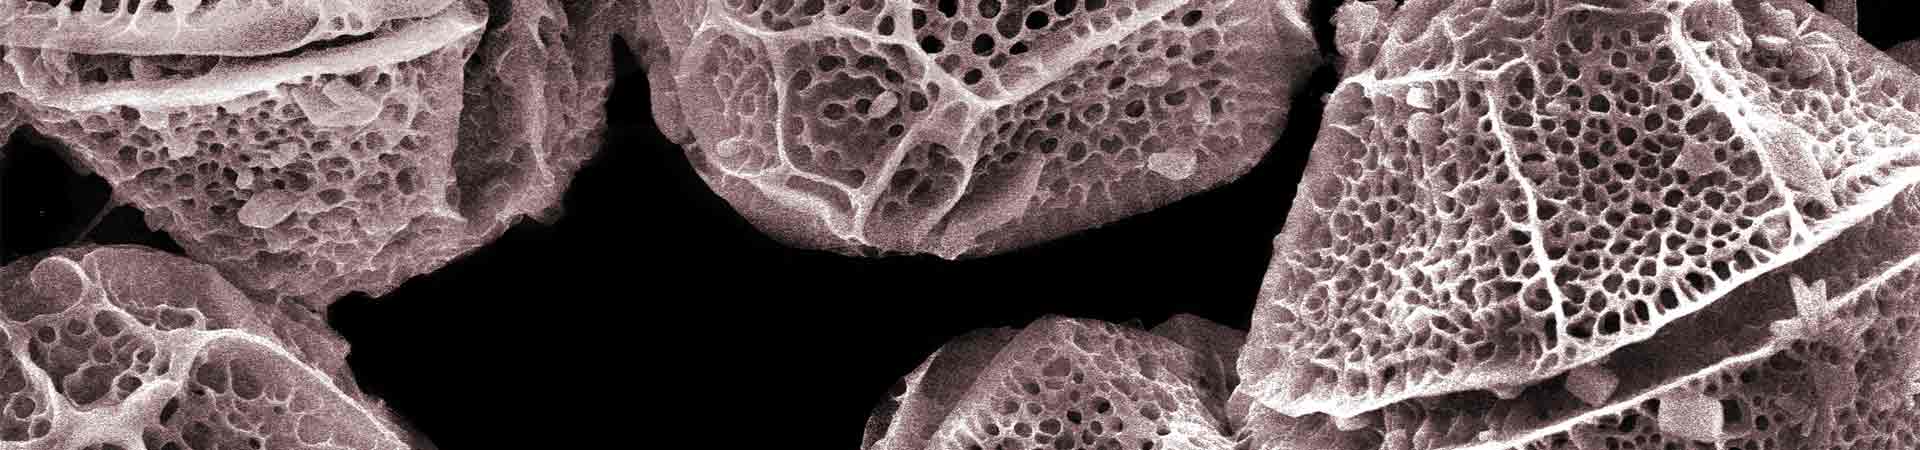 Electron microscope image of dinoflagellates that can produce shellfish toxins